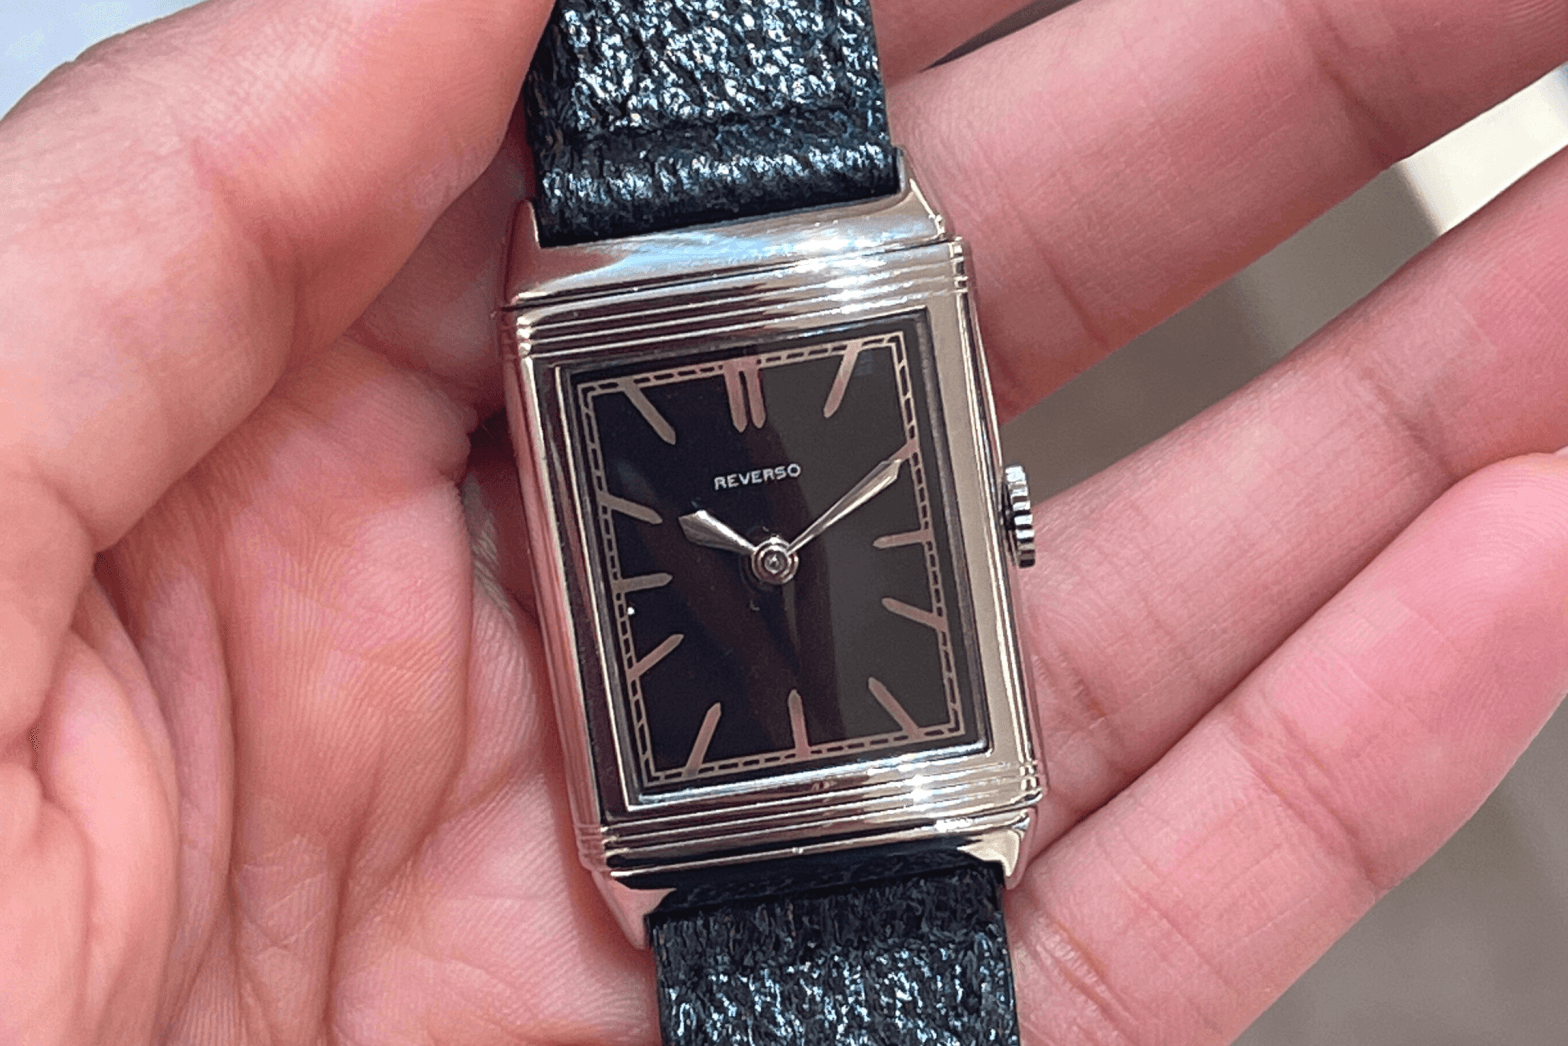 First Reverso